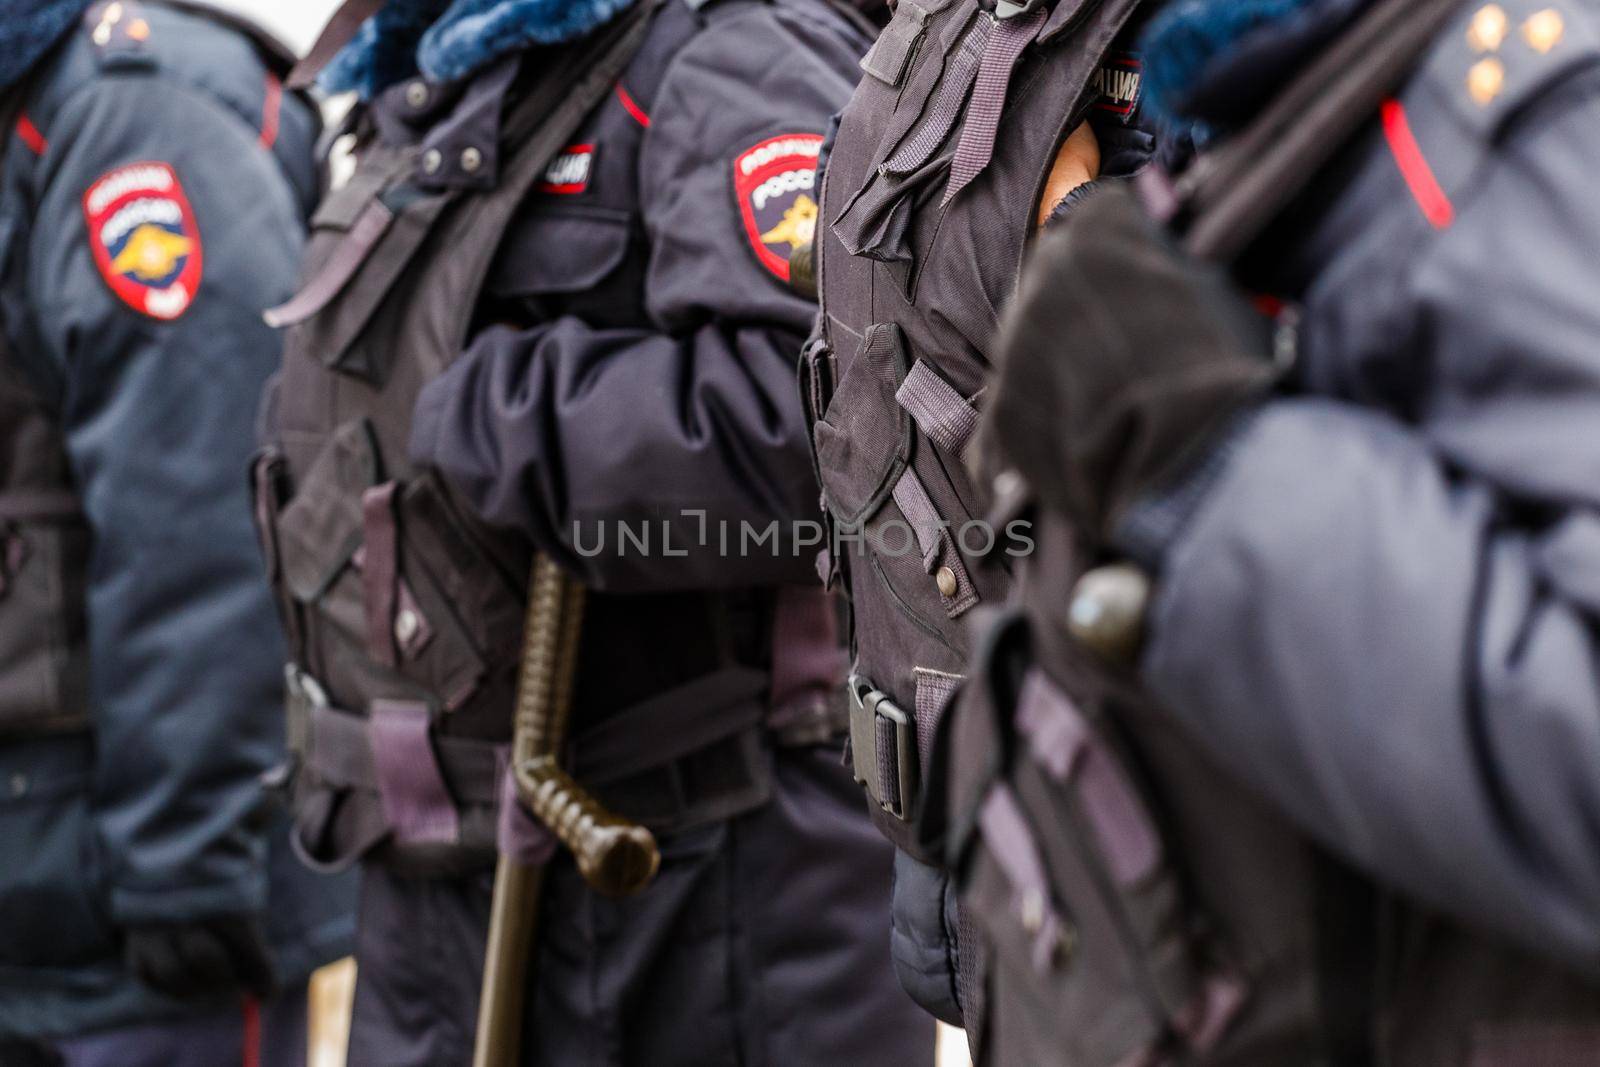 Police officers in black uniform with bulletproof vests - close-up view on black gloves. by z1b